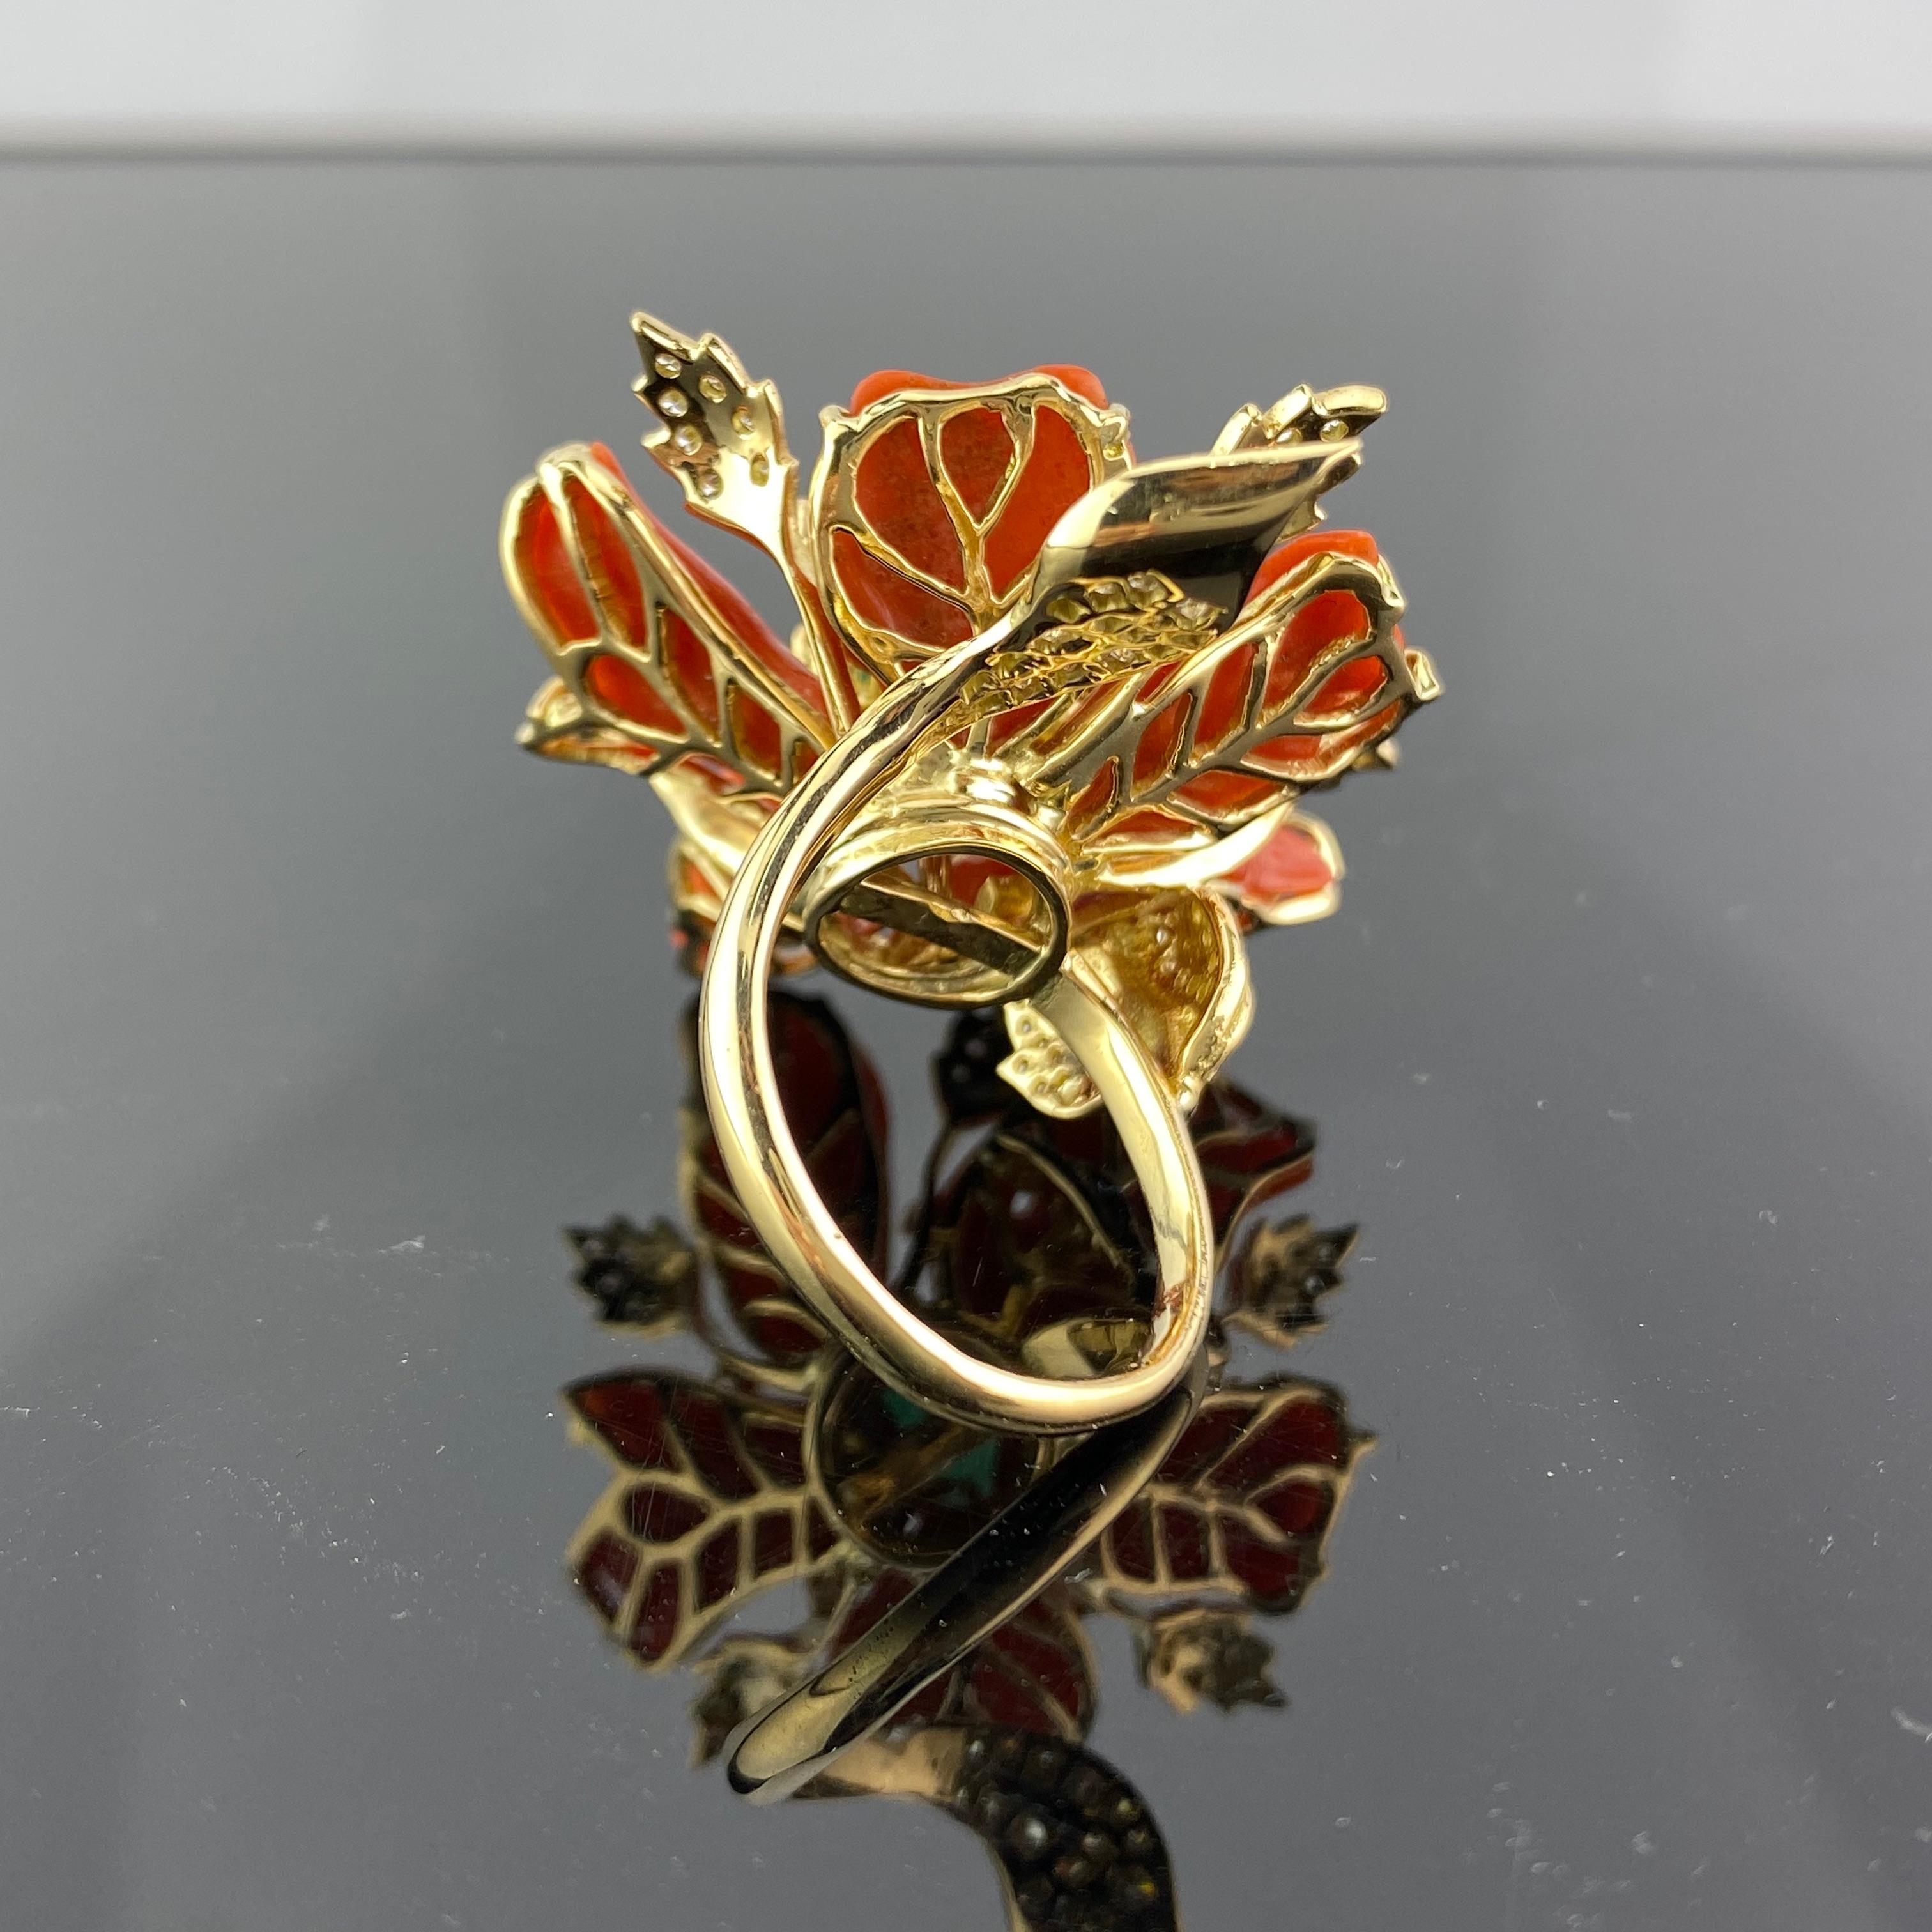 A beautiful, unique cocktail ring, made with natural Italian Coral adorned with White Diamonds and a centre cabochon Zambian Emerald. There is 15.35 carats of Coral, 0.84 carats of round white diamond, 1.30 carat of Emerald all set in 15.217 grams